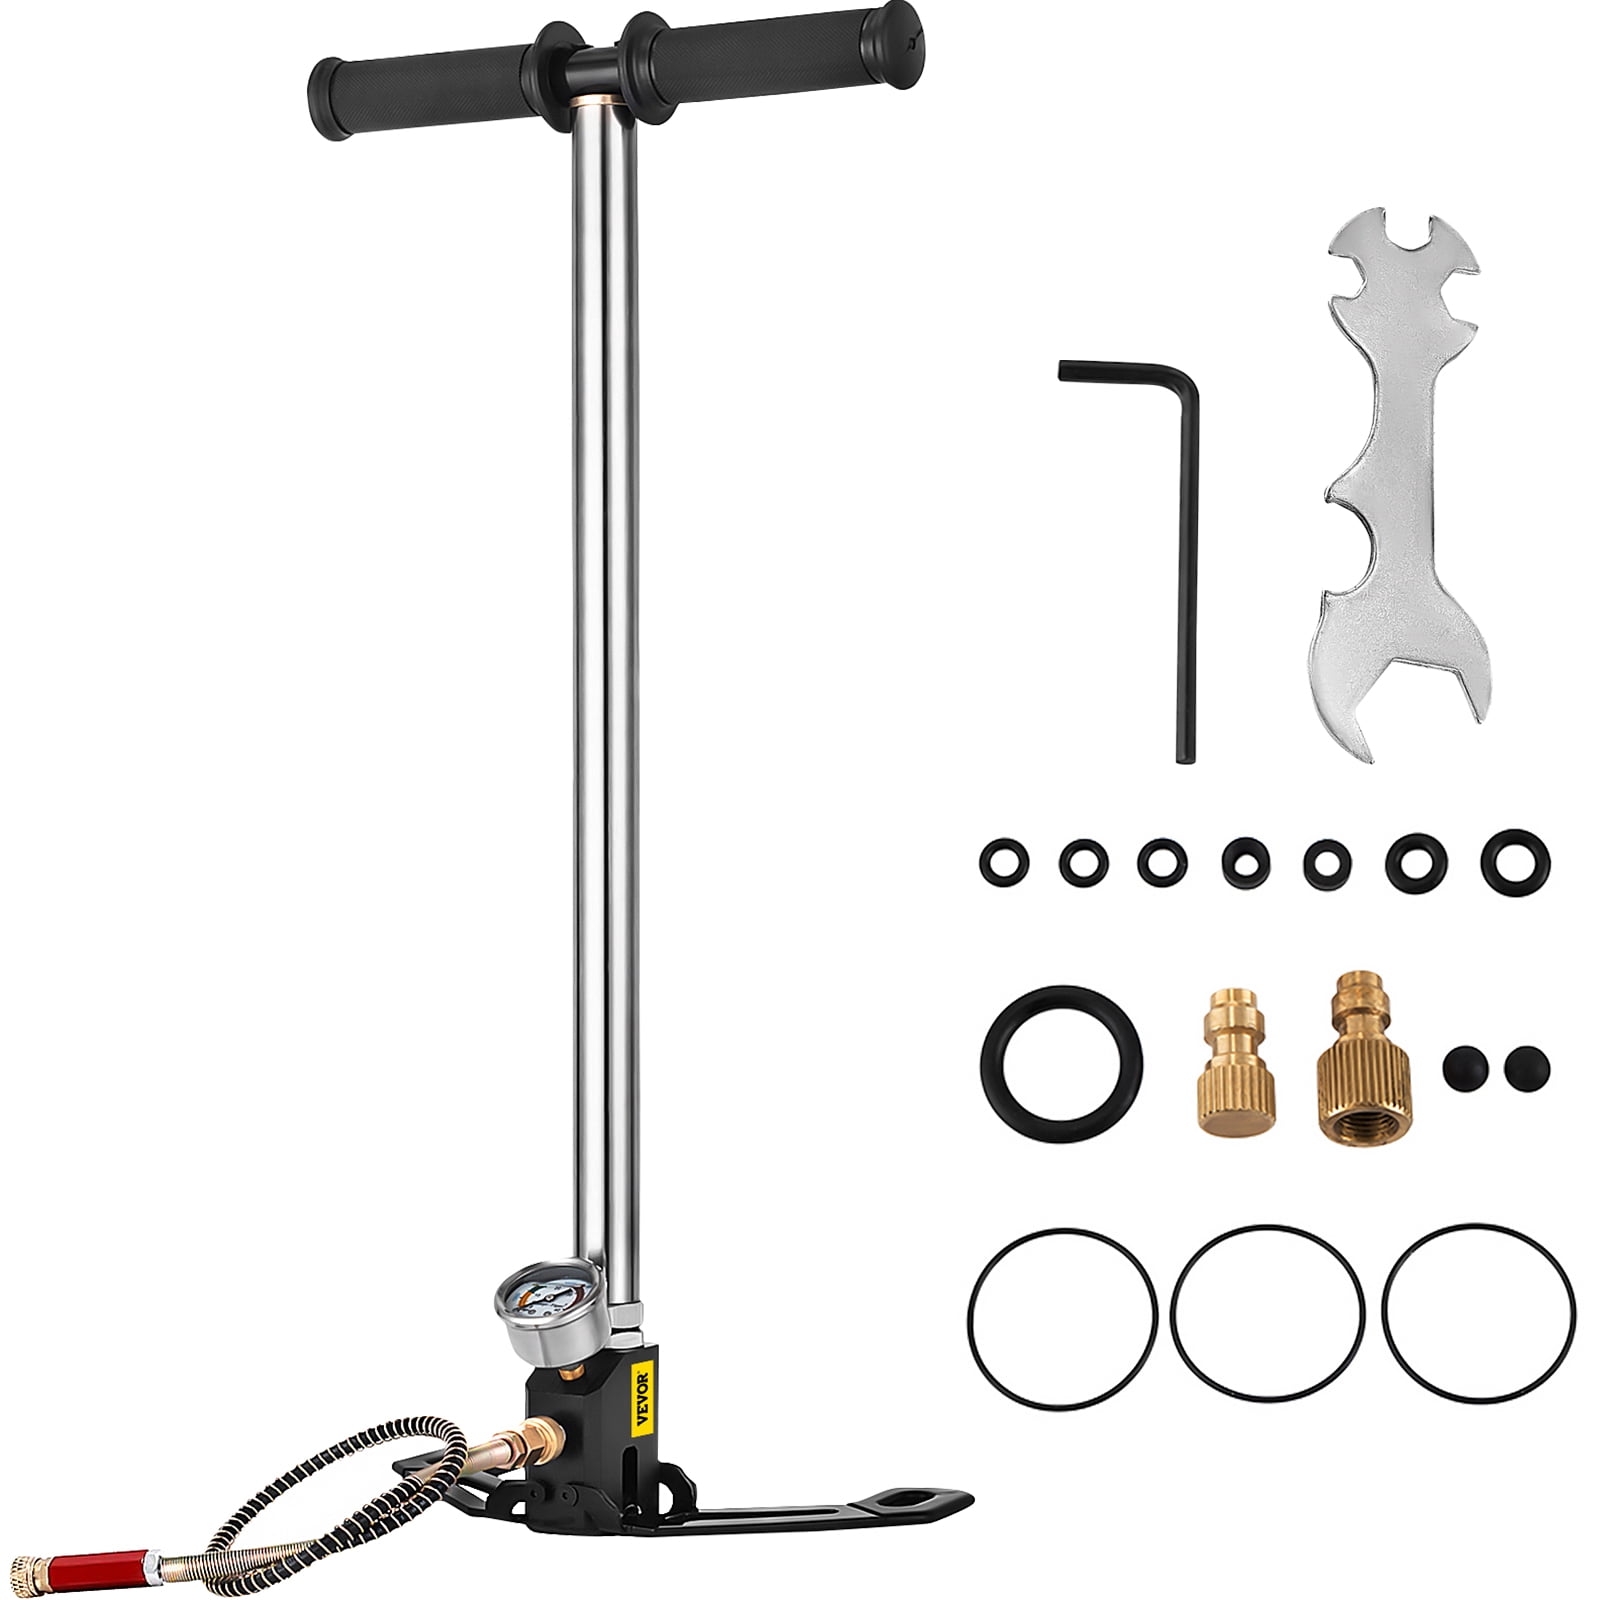 High Pressure Hand Pump 3 Stage up to 6000 psi PCP Pump Safe and Convenient Airgun PCP Pump High Pressure Hand Pump for High Pressure Tires and Pre-Charged Pneumatic Airguns 